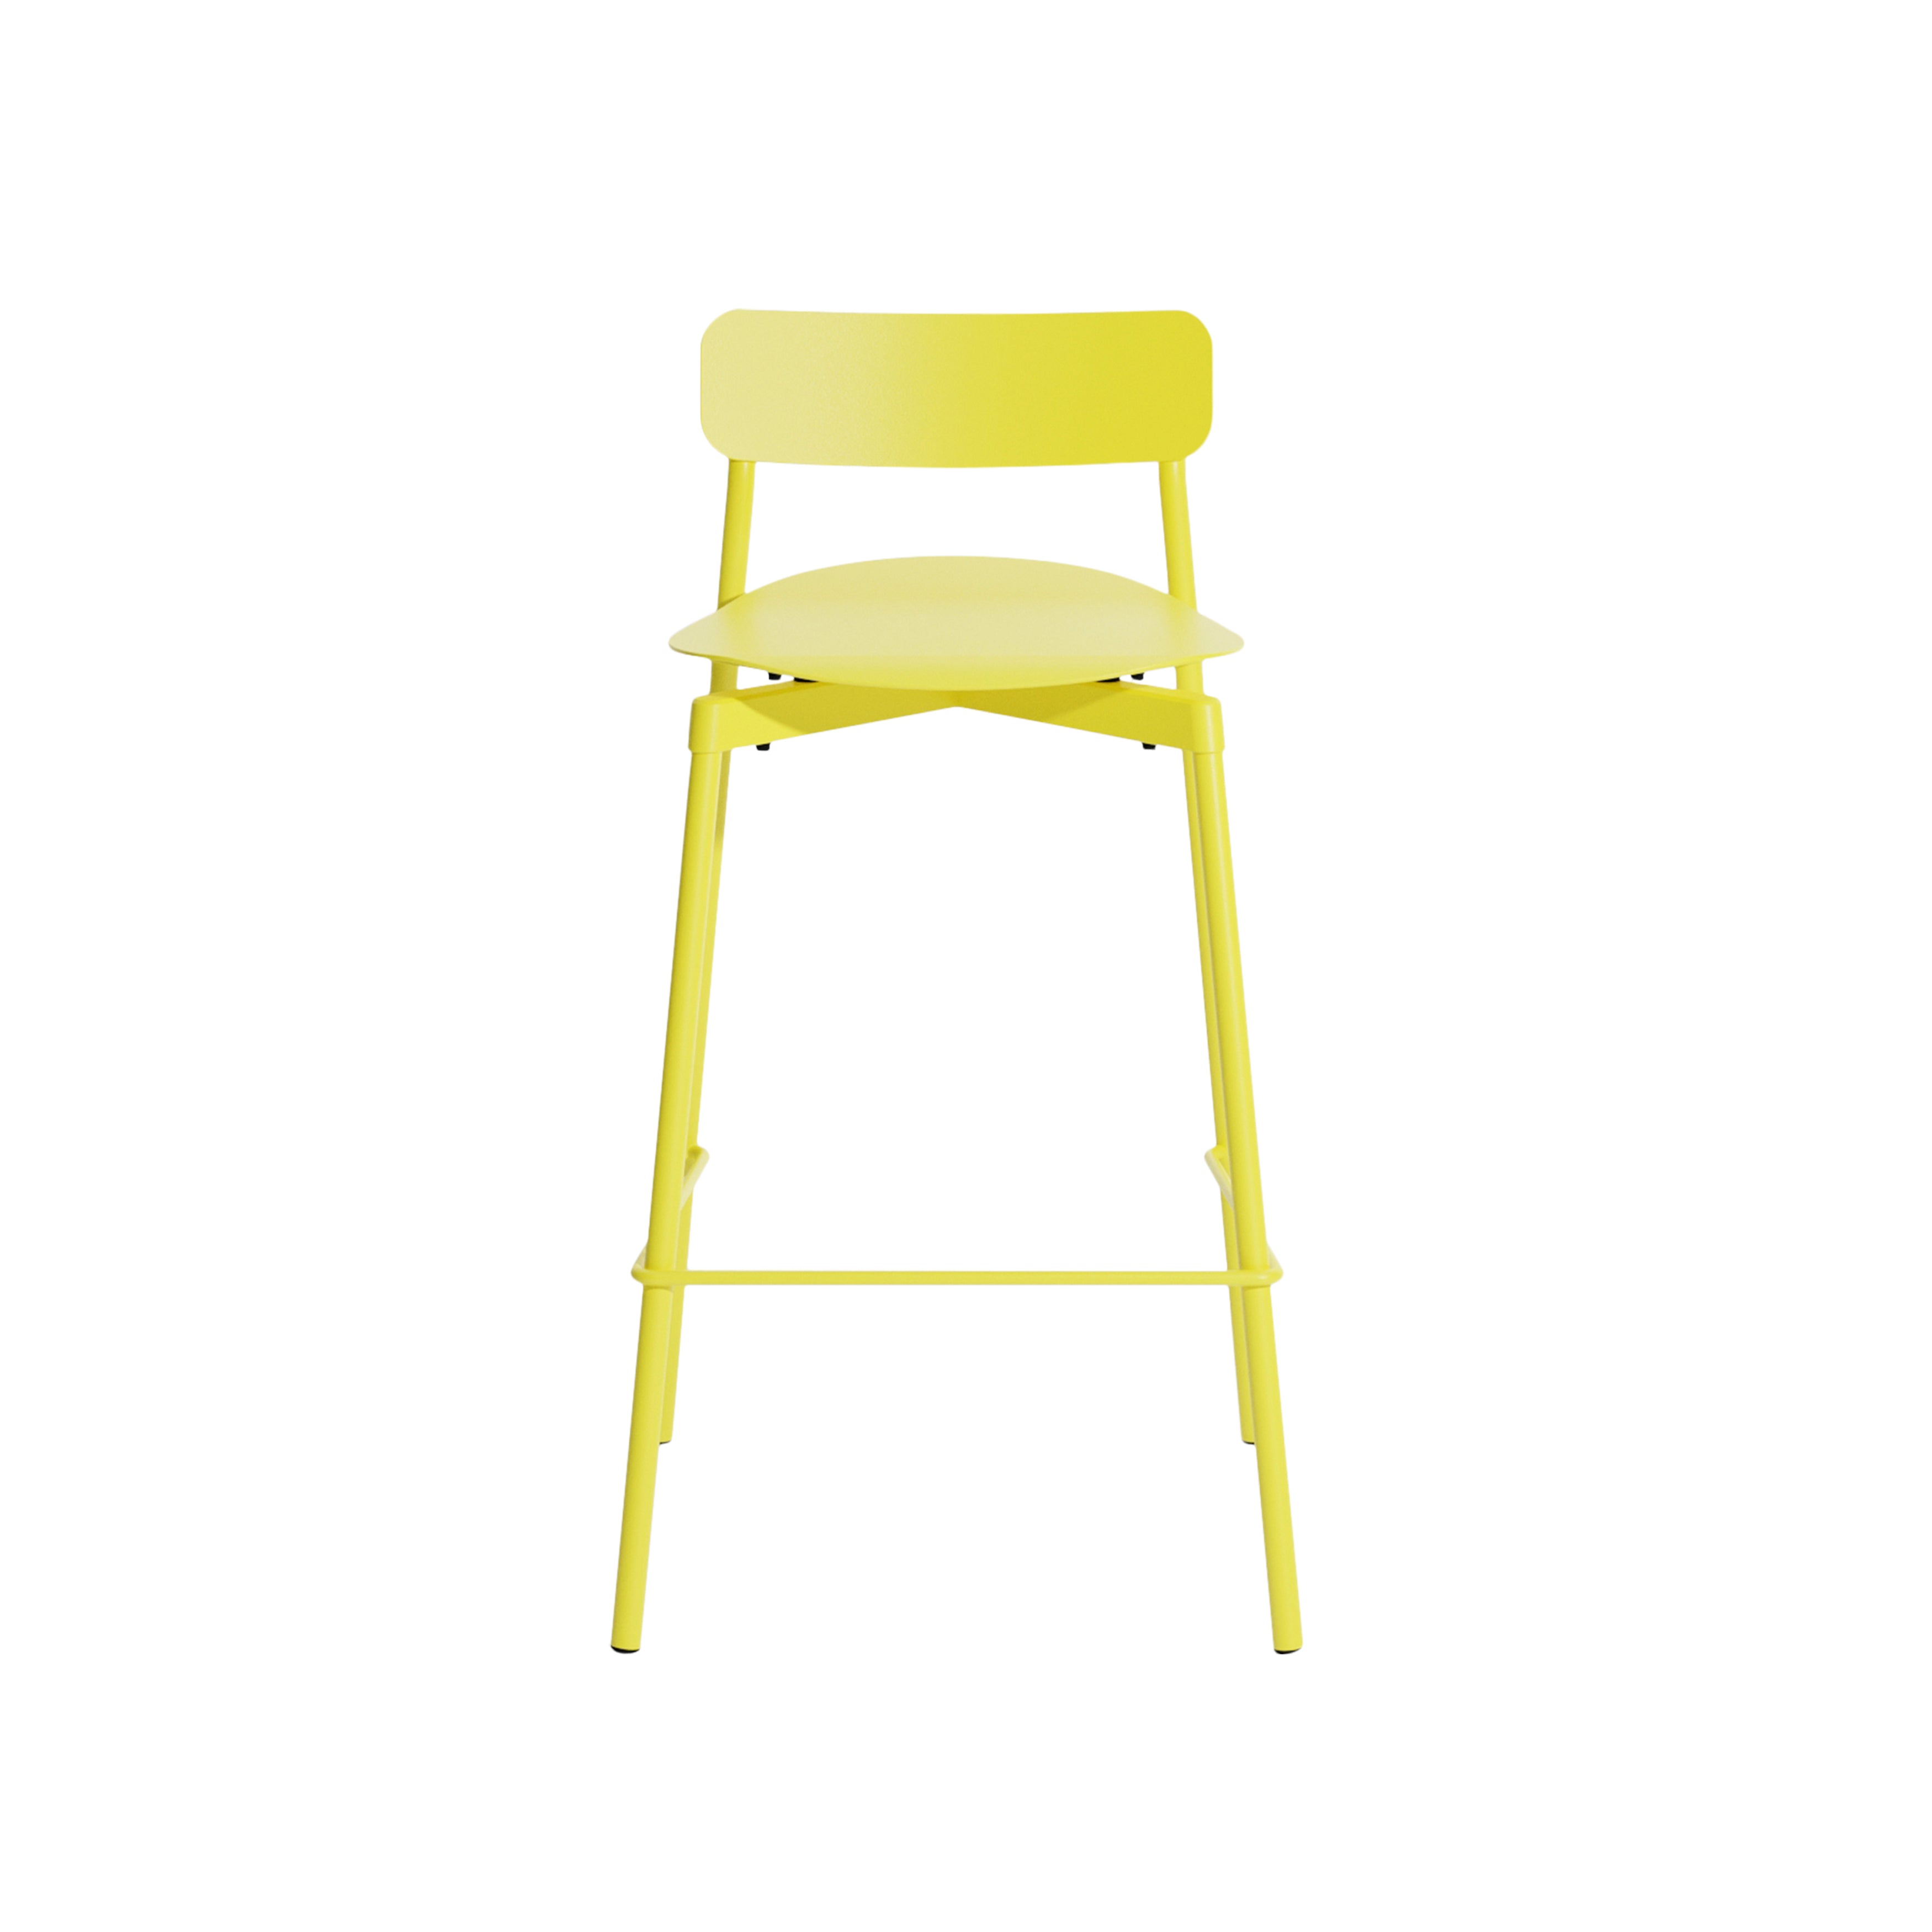 Fromme Stacking Bar + Counter Stool: Counter + Yellow